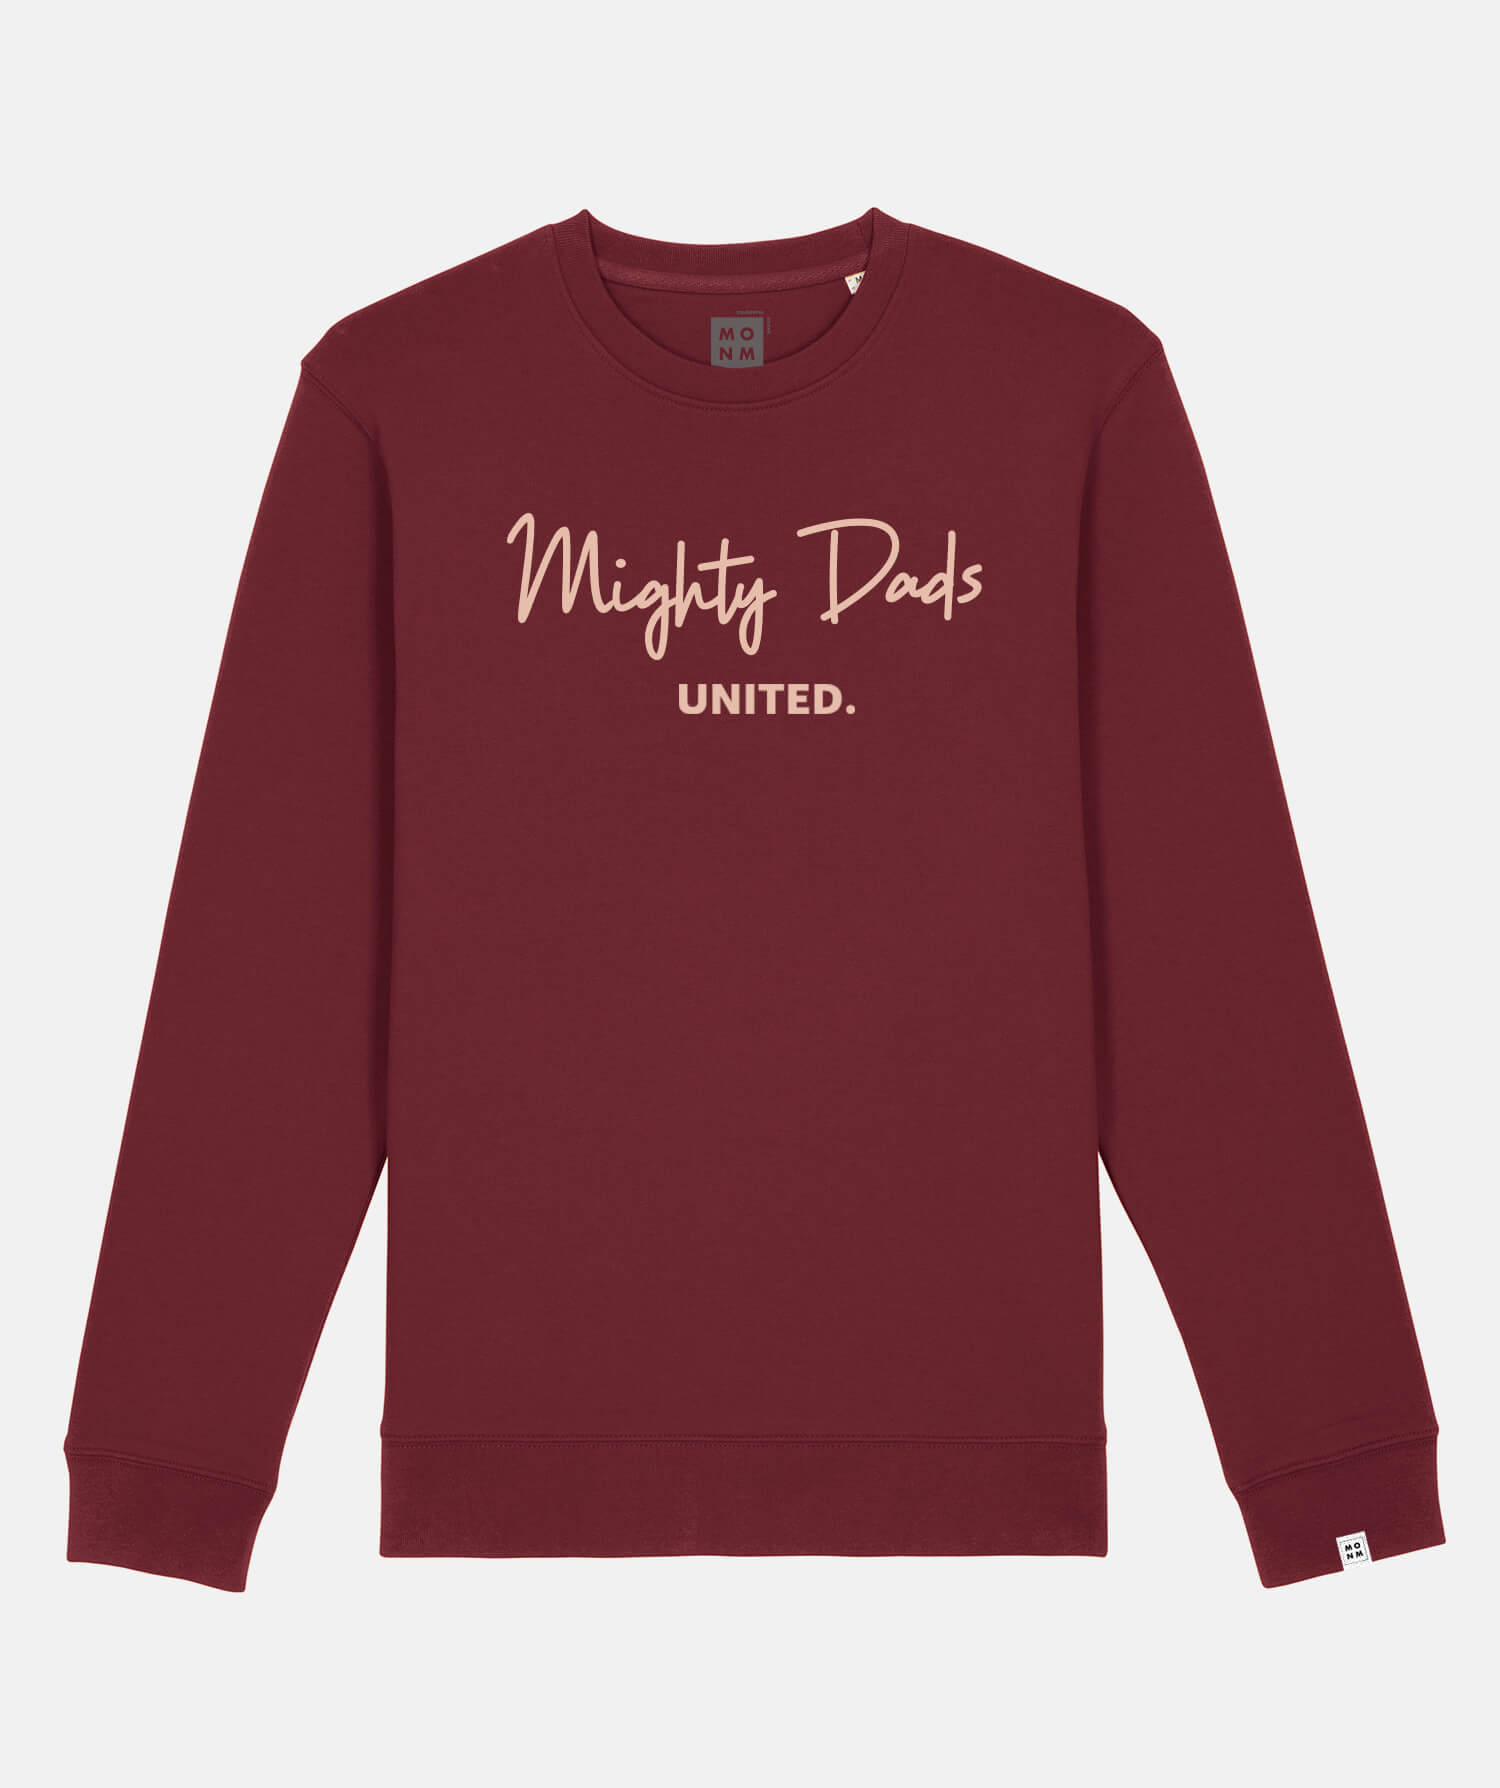 Mighty dads united sweater van Mangos on Monday